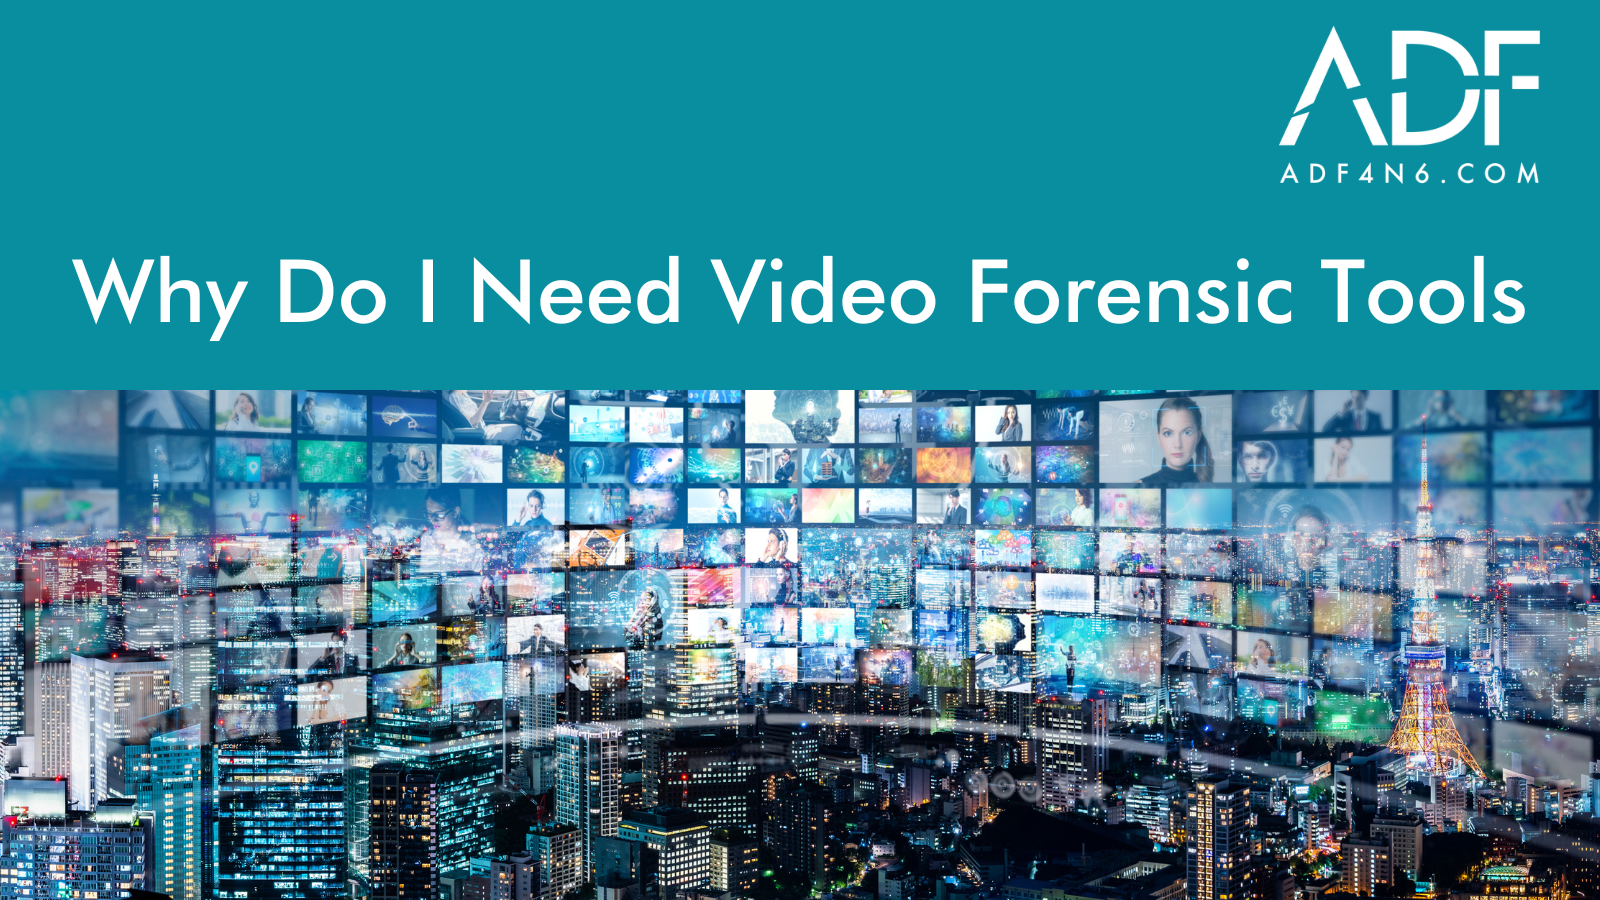 Why Do I Need Video Forensics Tools?